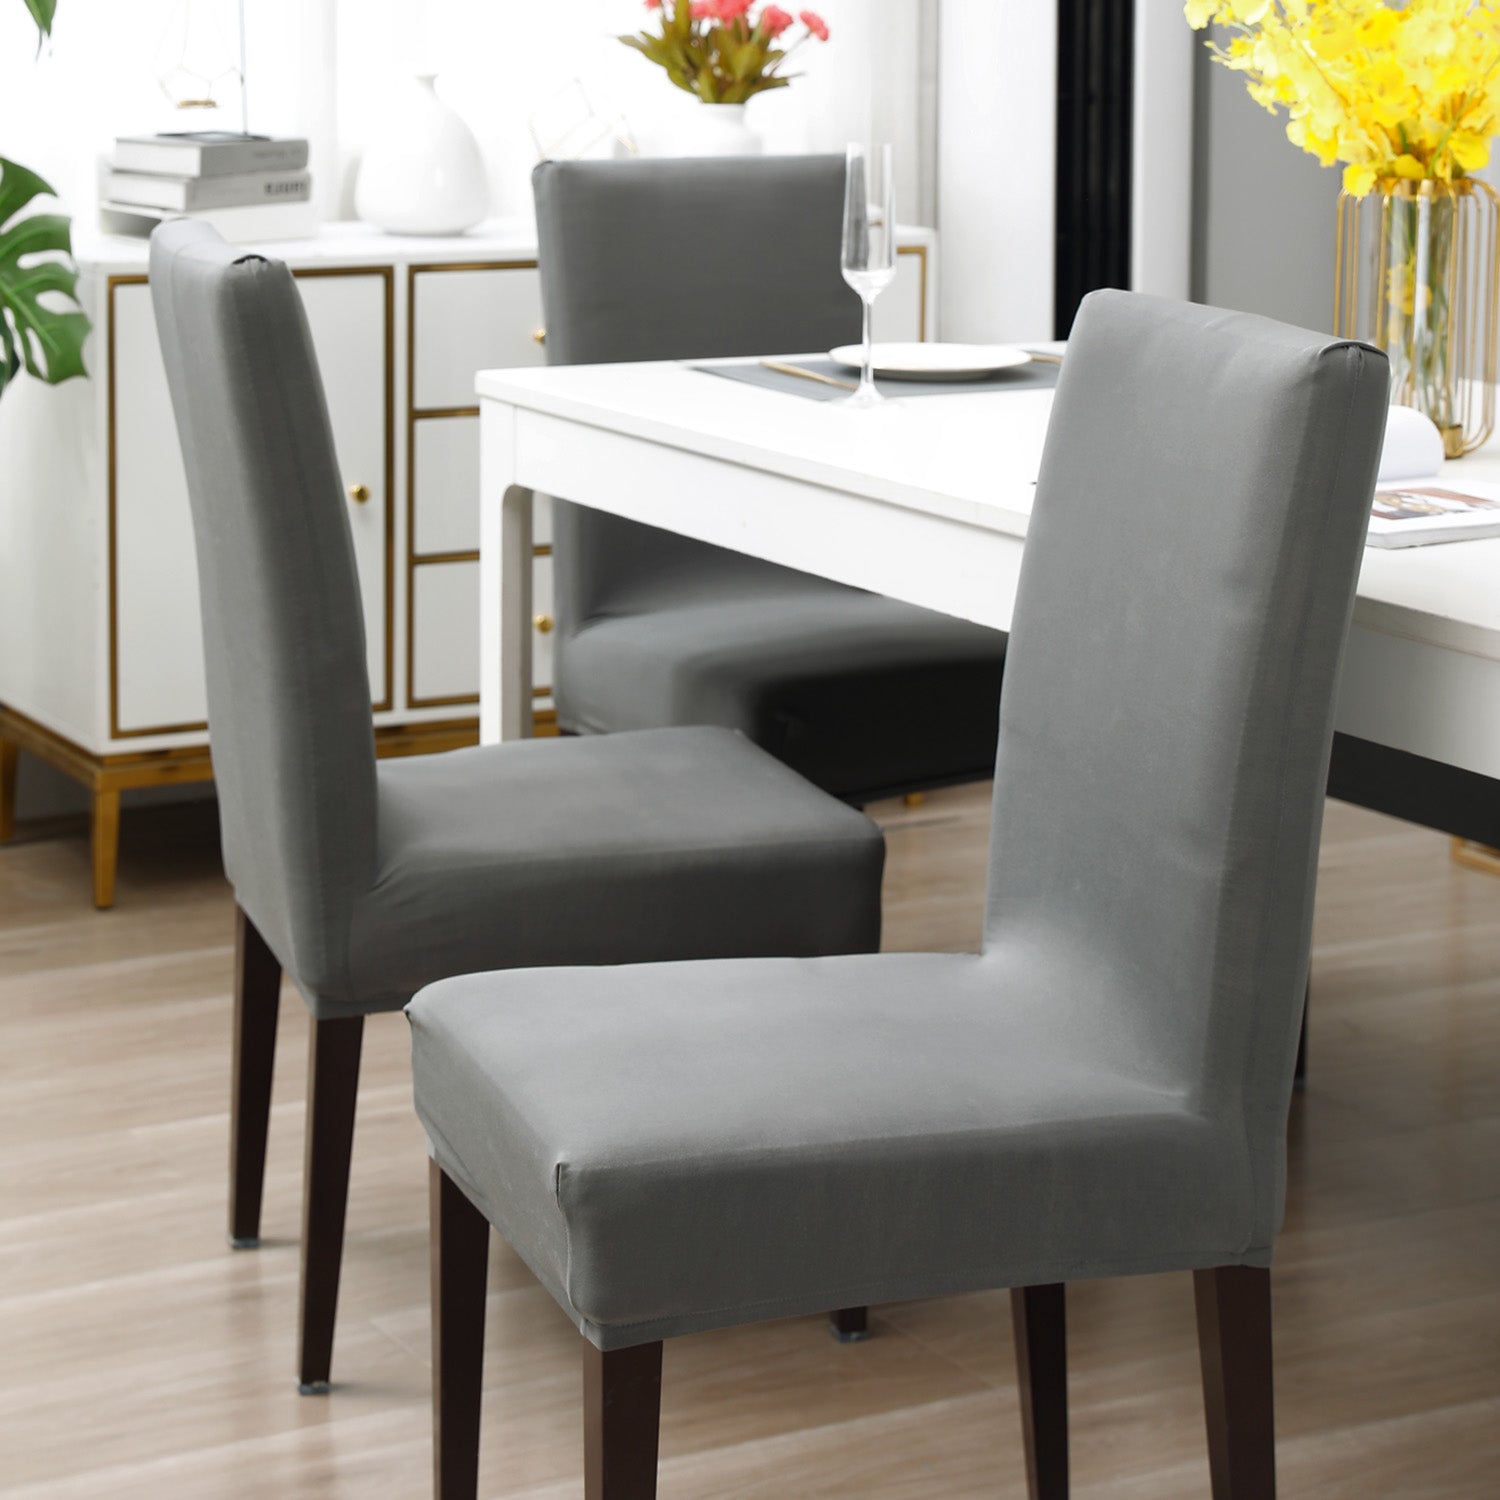 Elastic Stretchable Dining Chair Cover, Light Grey